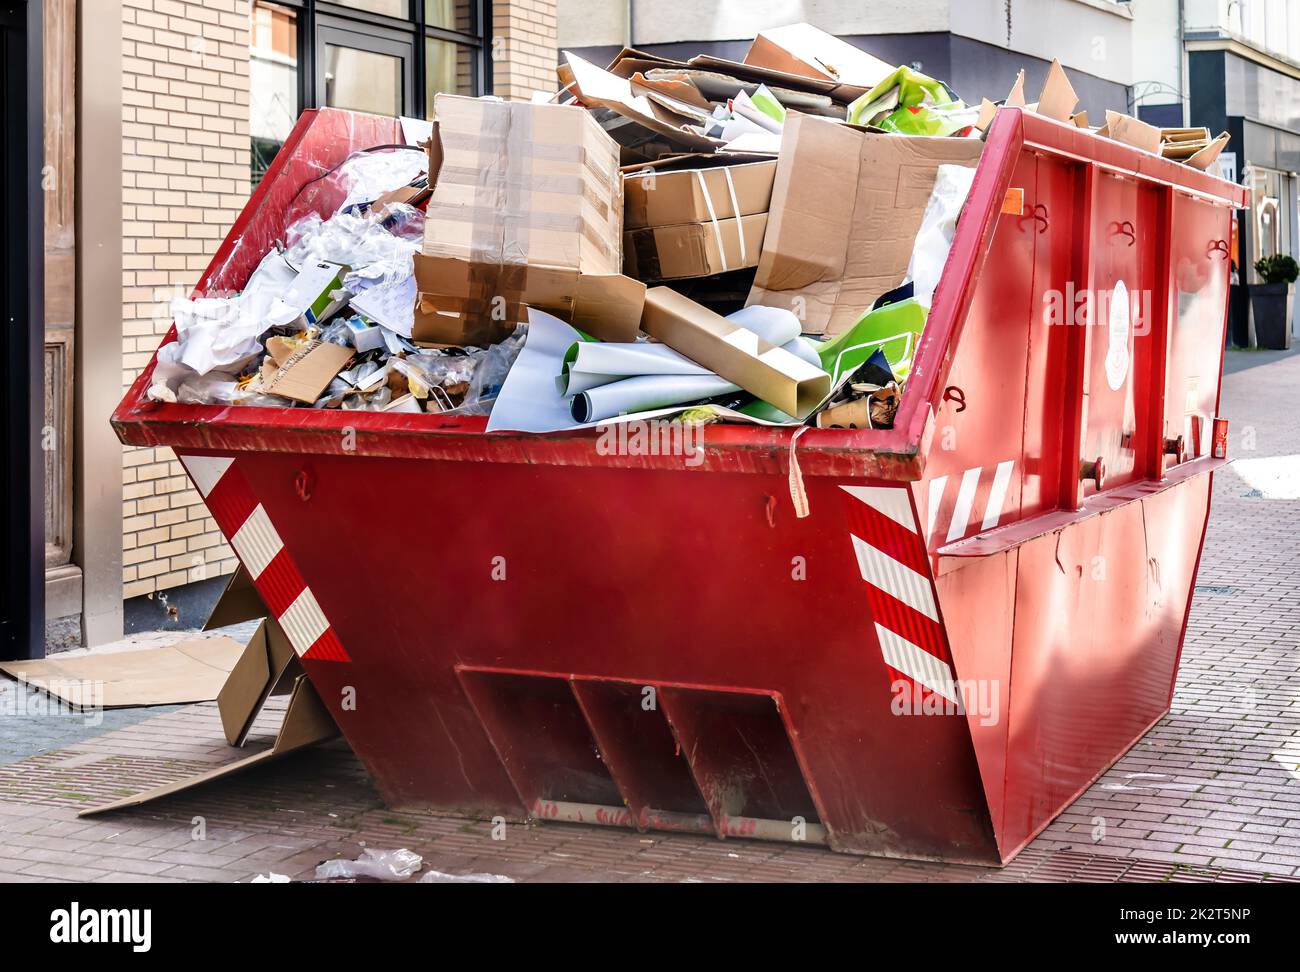 Red metallic Container filled with cardboard Trash in front of a shop downtown Stock Photo